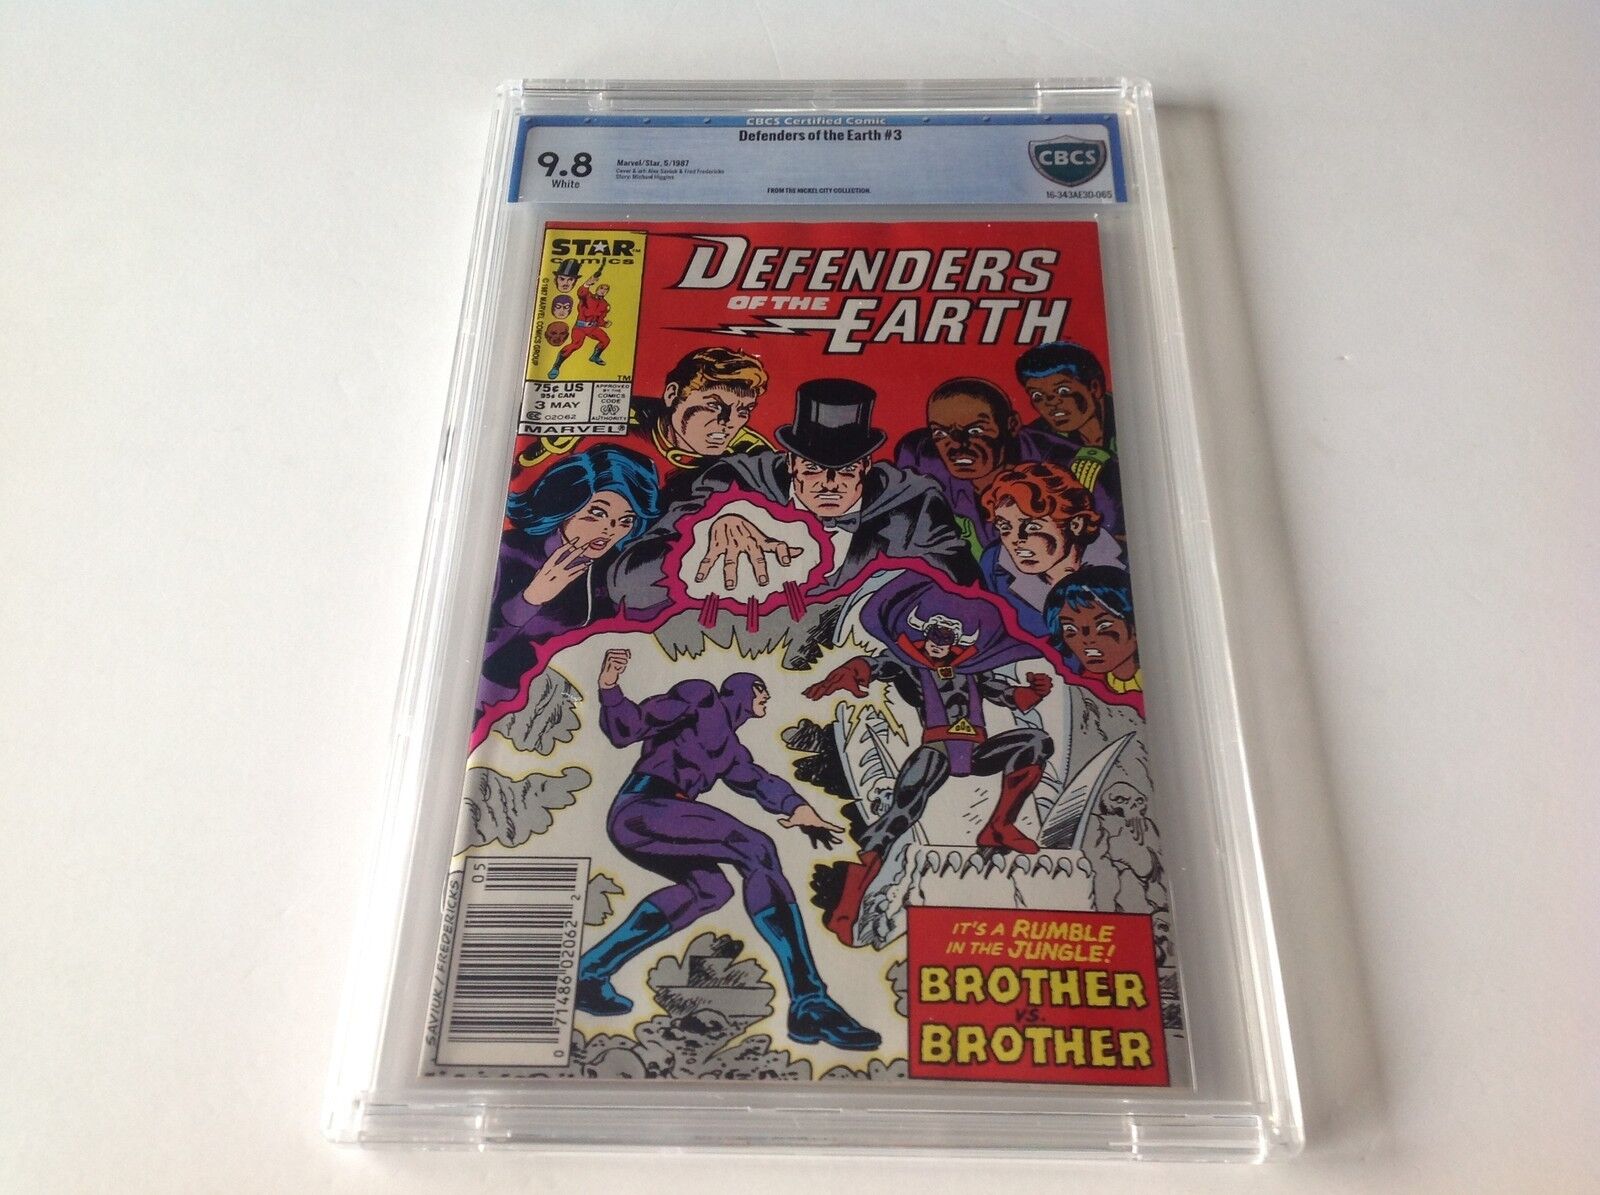 DEFENDERS OF THE EARTH 3 CBCS 9.8 WHITE NICKEL CITY PED MARVEL COMICS LIKE CGC